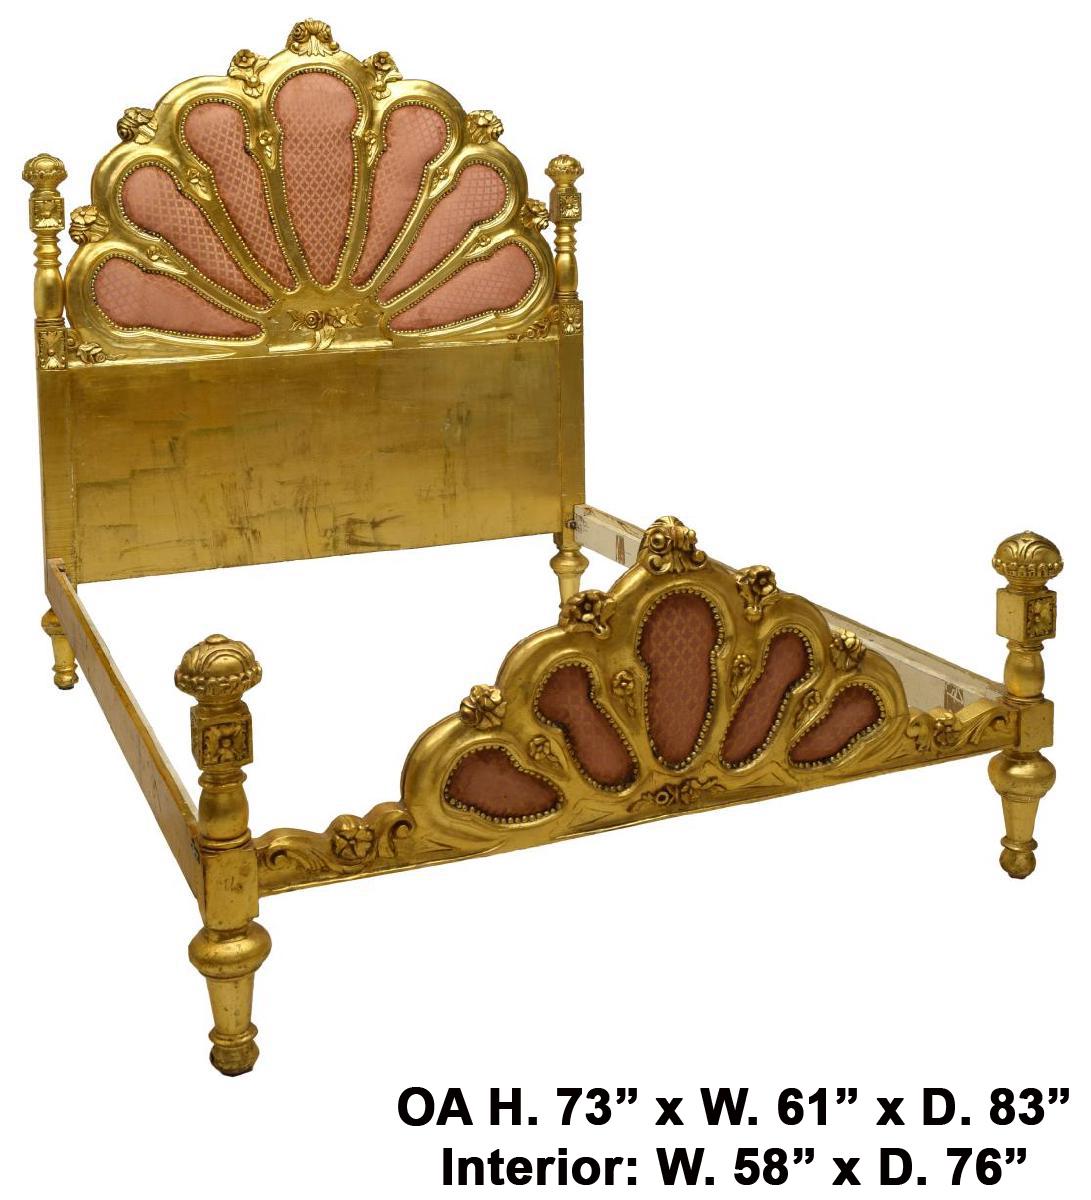 Italian carved giltwood upholstered bed.
20th century. 

The giltwood headboard is decorated in a shell motif intertwined with a pink upholstery, preceded by a footboard of a conforming shell motif. All finished with beautiful